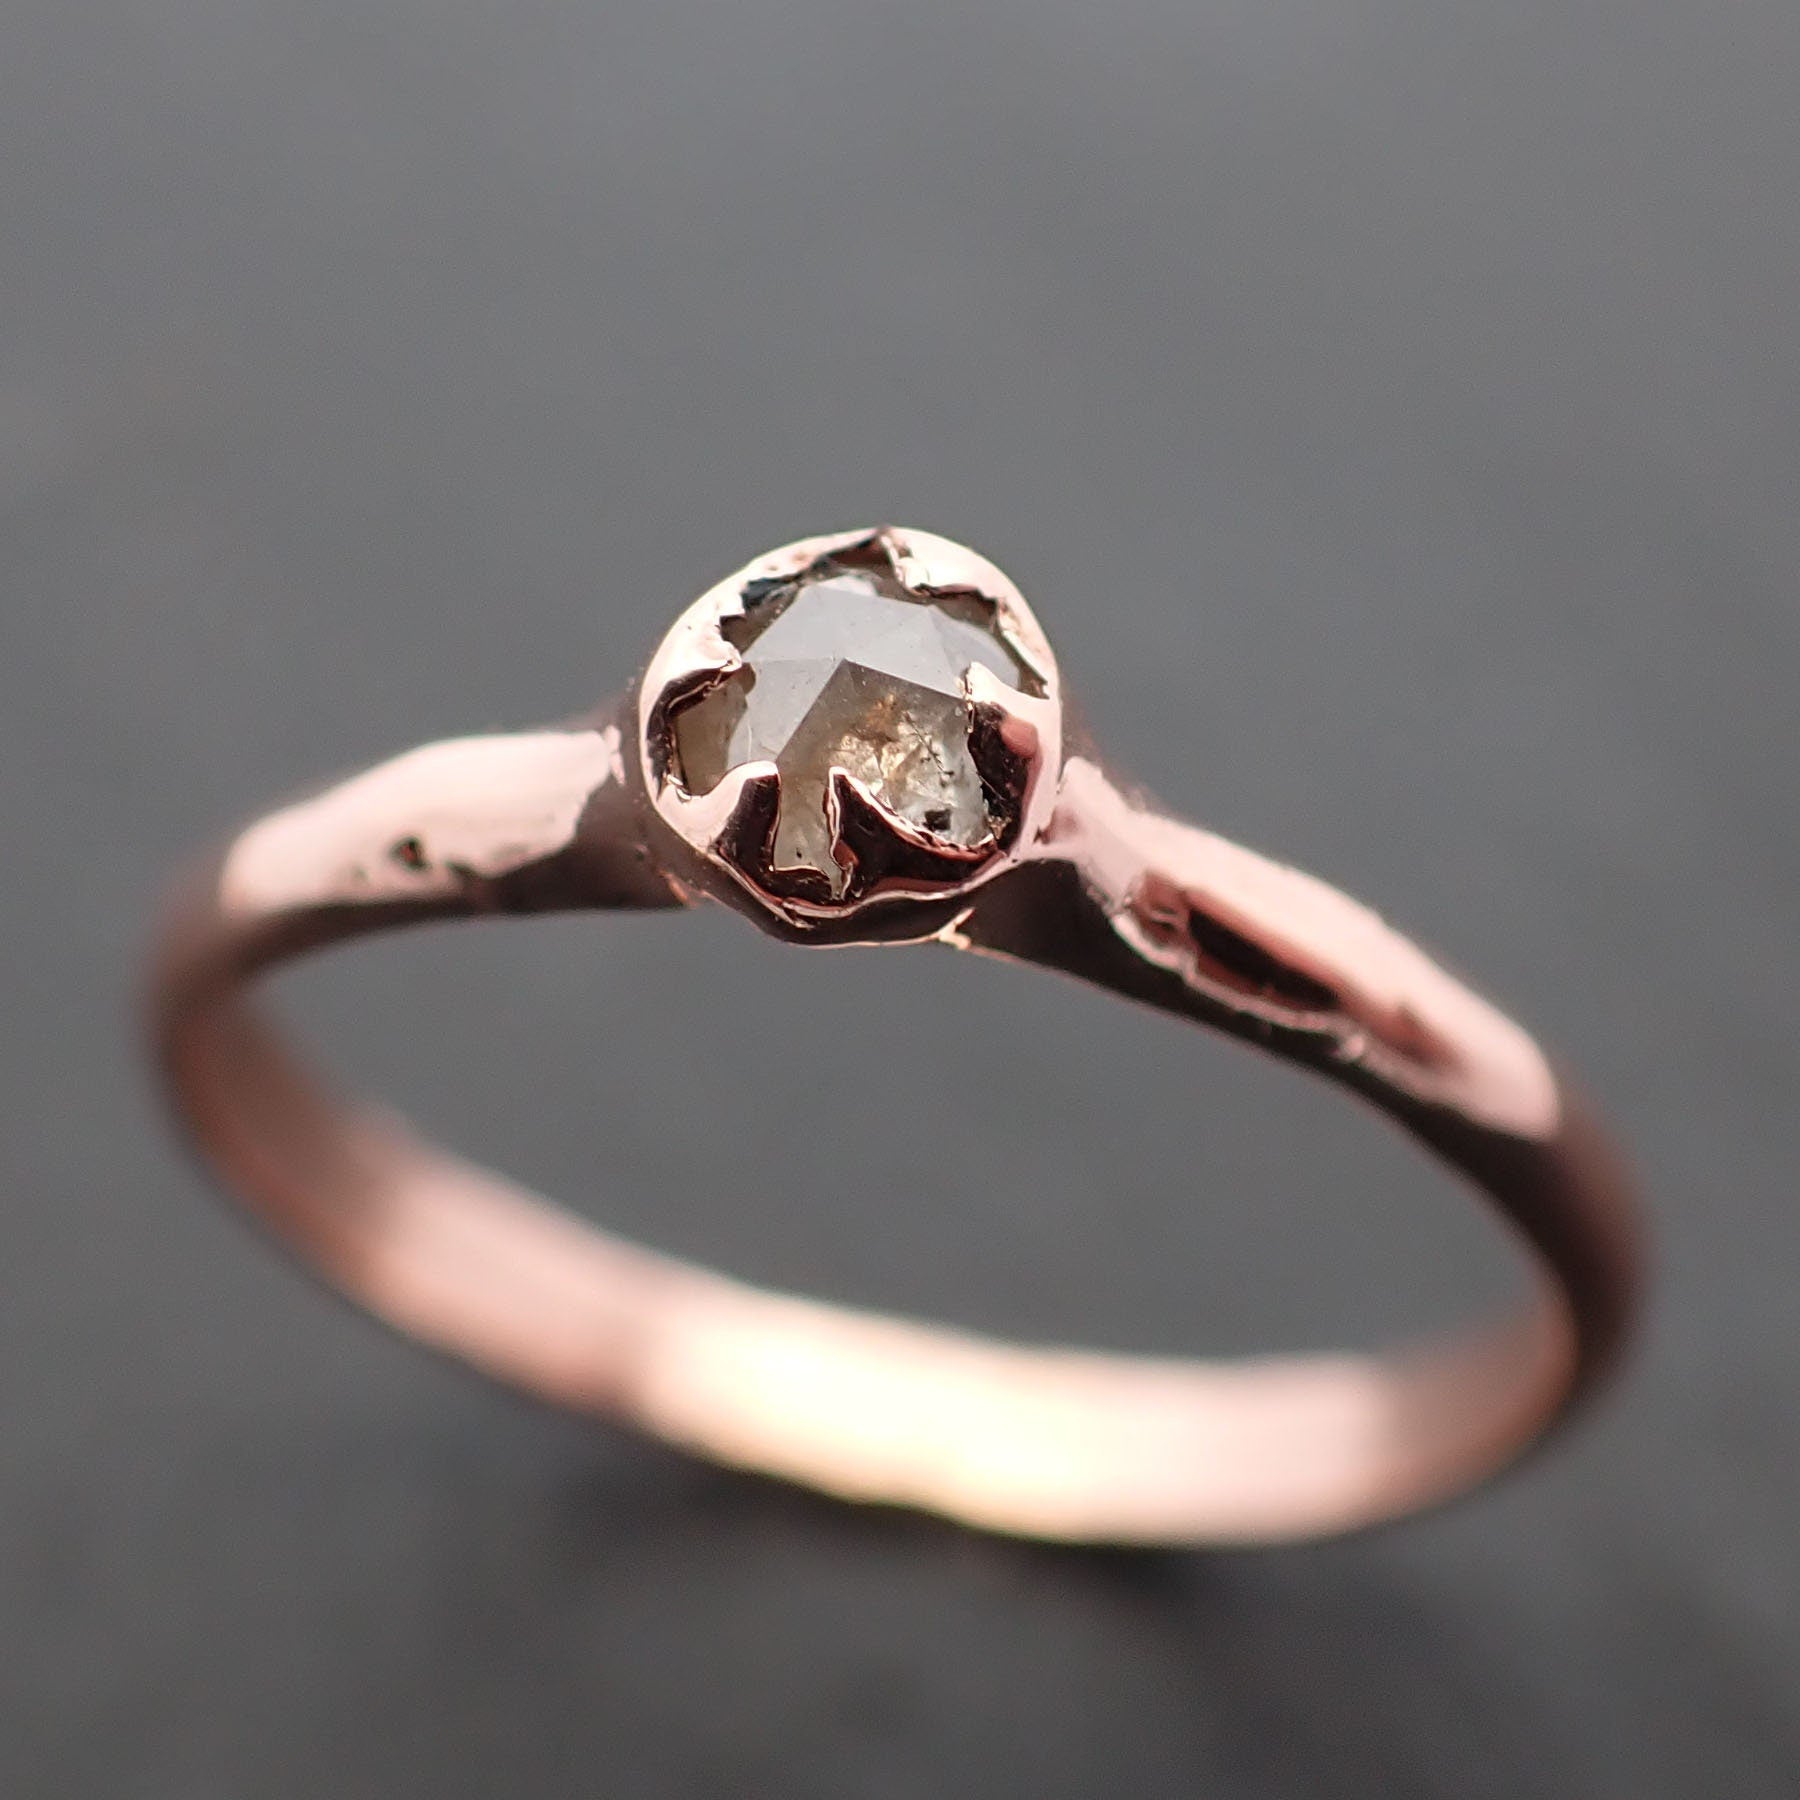 Faceted Fancy cut gray Diamond Solitaire Engagement 14k Rose Gold Wedding Ring byAngeline 3504